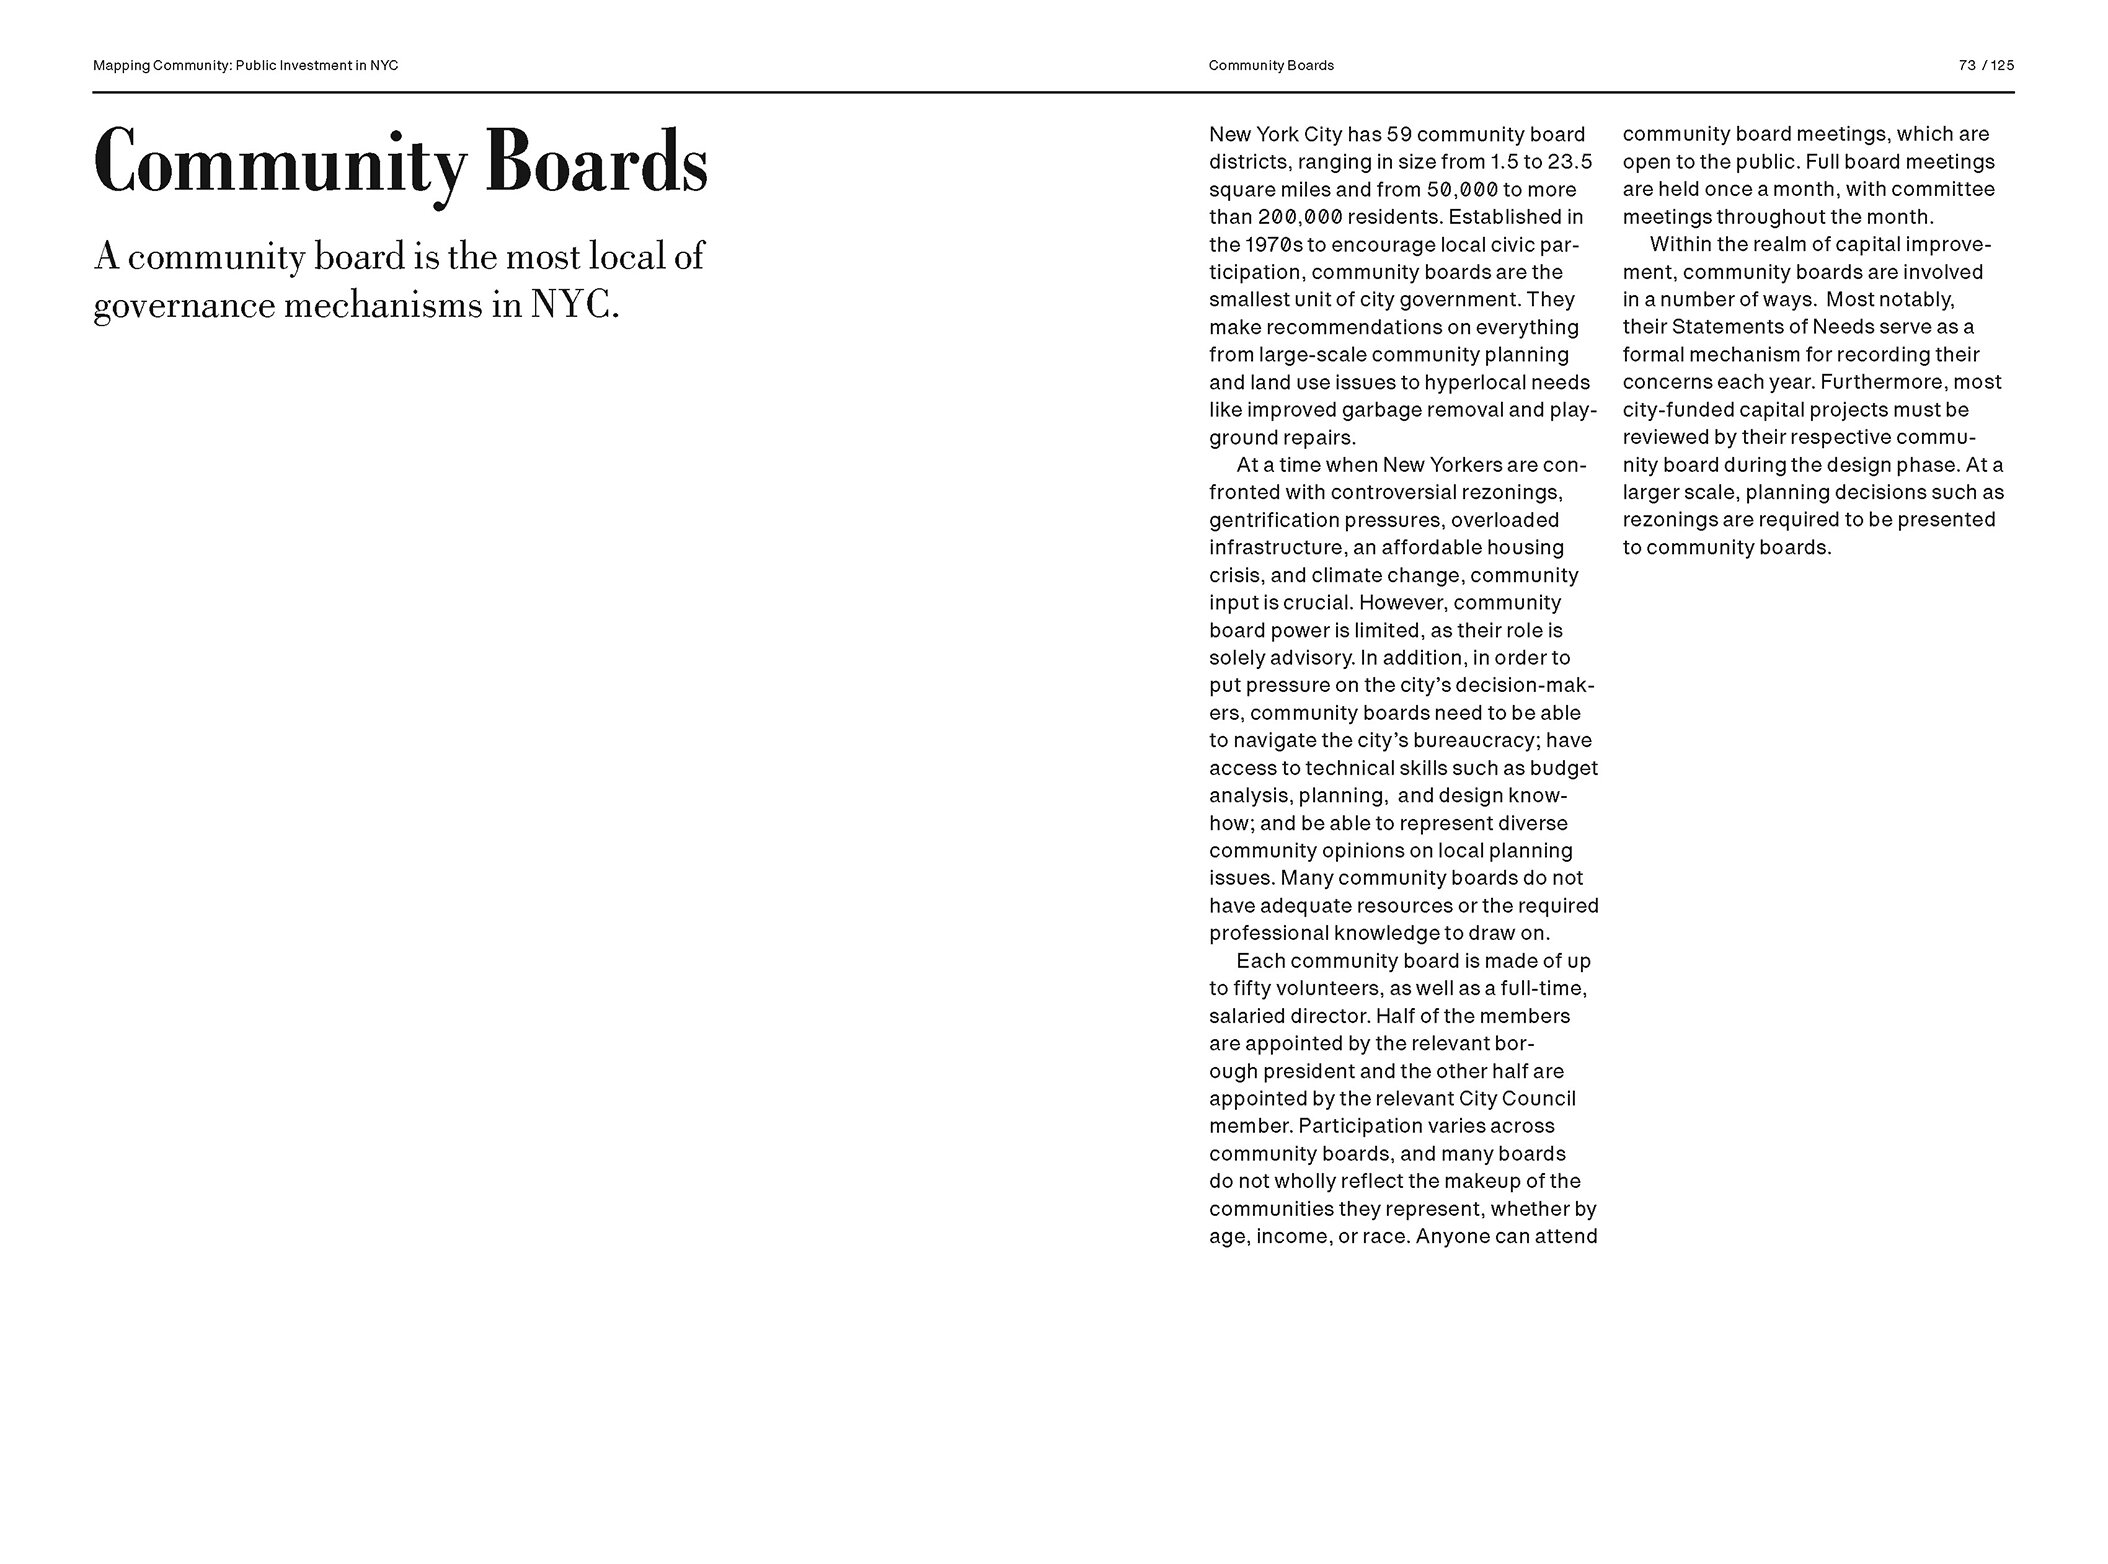 MAPPING COMMUNITY EXHIBT CATALOG_Page_37.jpg